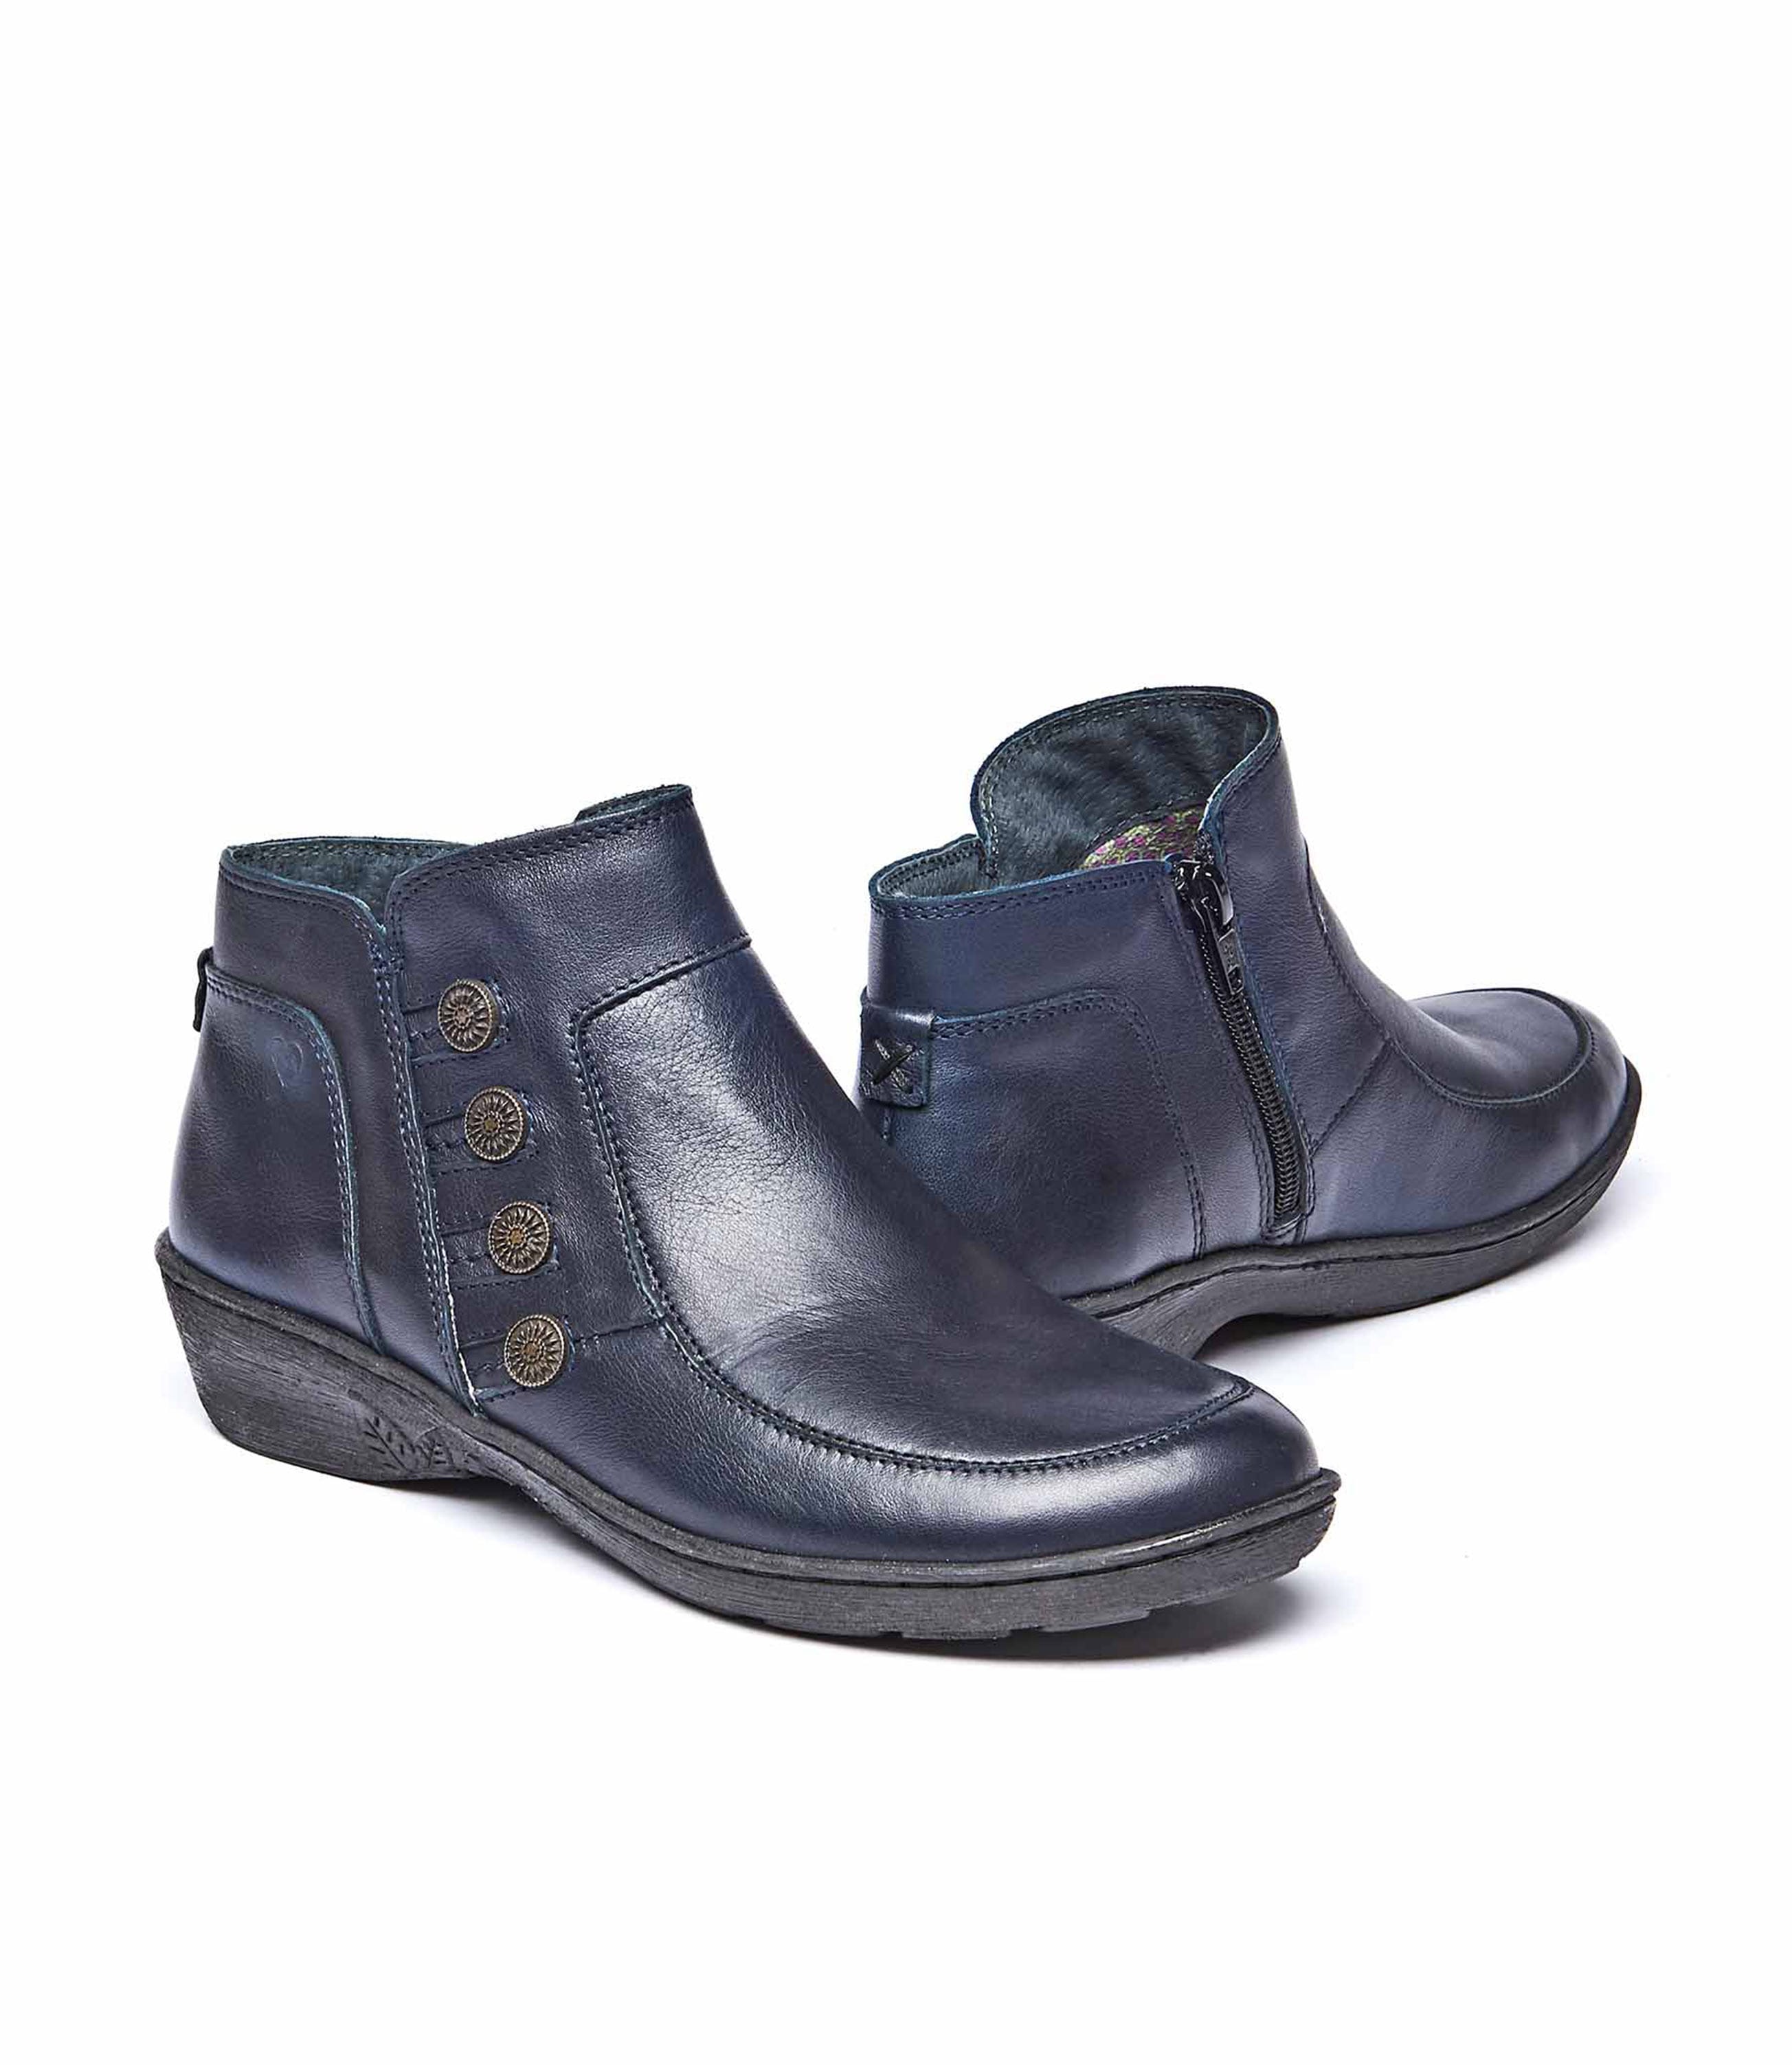 moshulu ankle boots